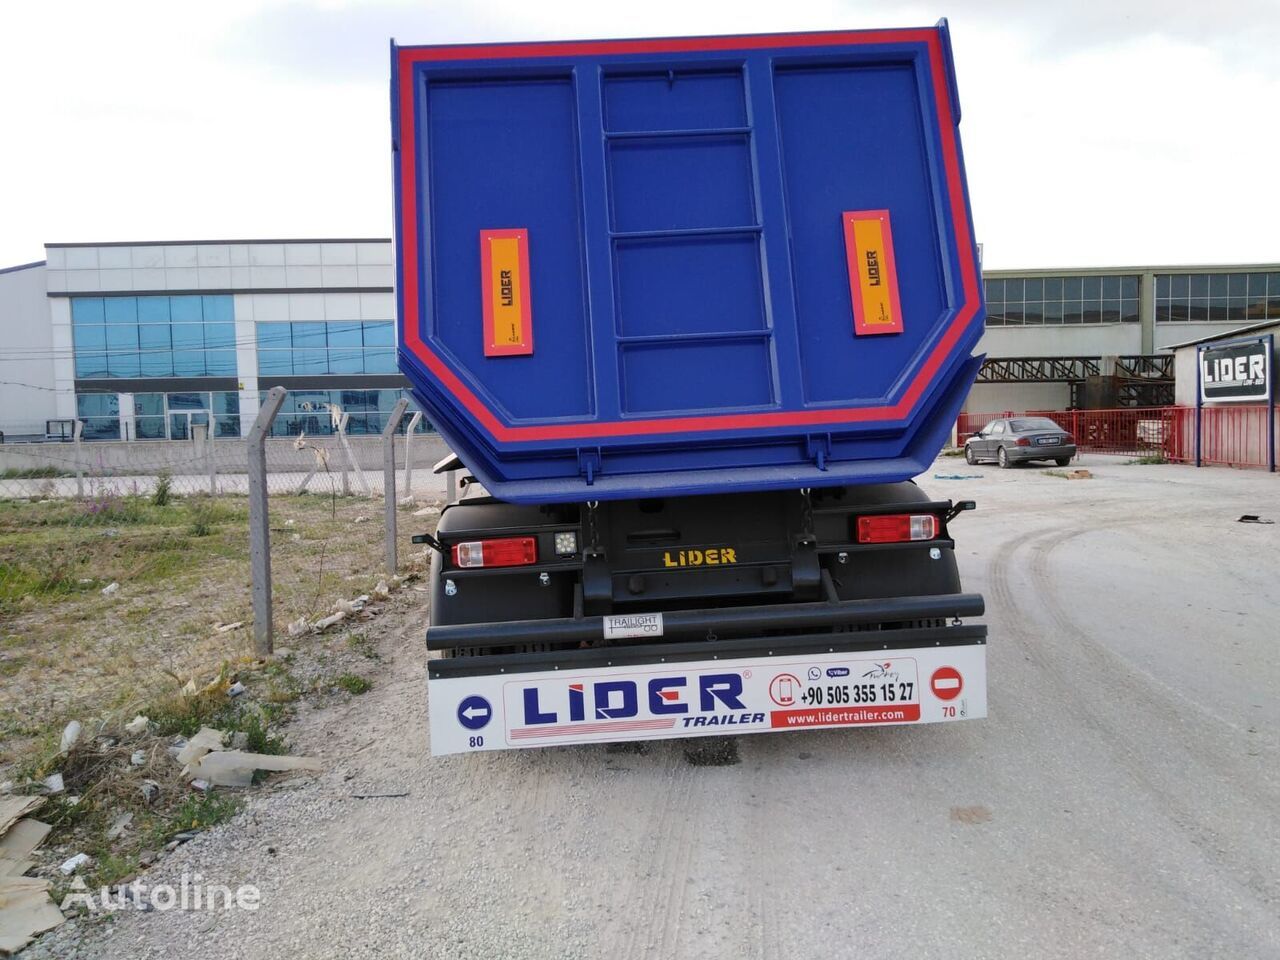 LIDER 2022 NEW READY IN STOCKS DIRECTLY FROM MANUFACTURER COMPANY в лизинг LIDER 2022 NEW READY IN STOCKS DIRECTLY FROM MANUFACTURER COMPANY: фото 17